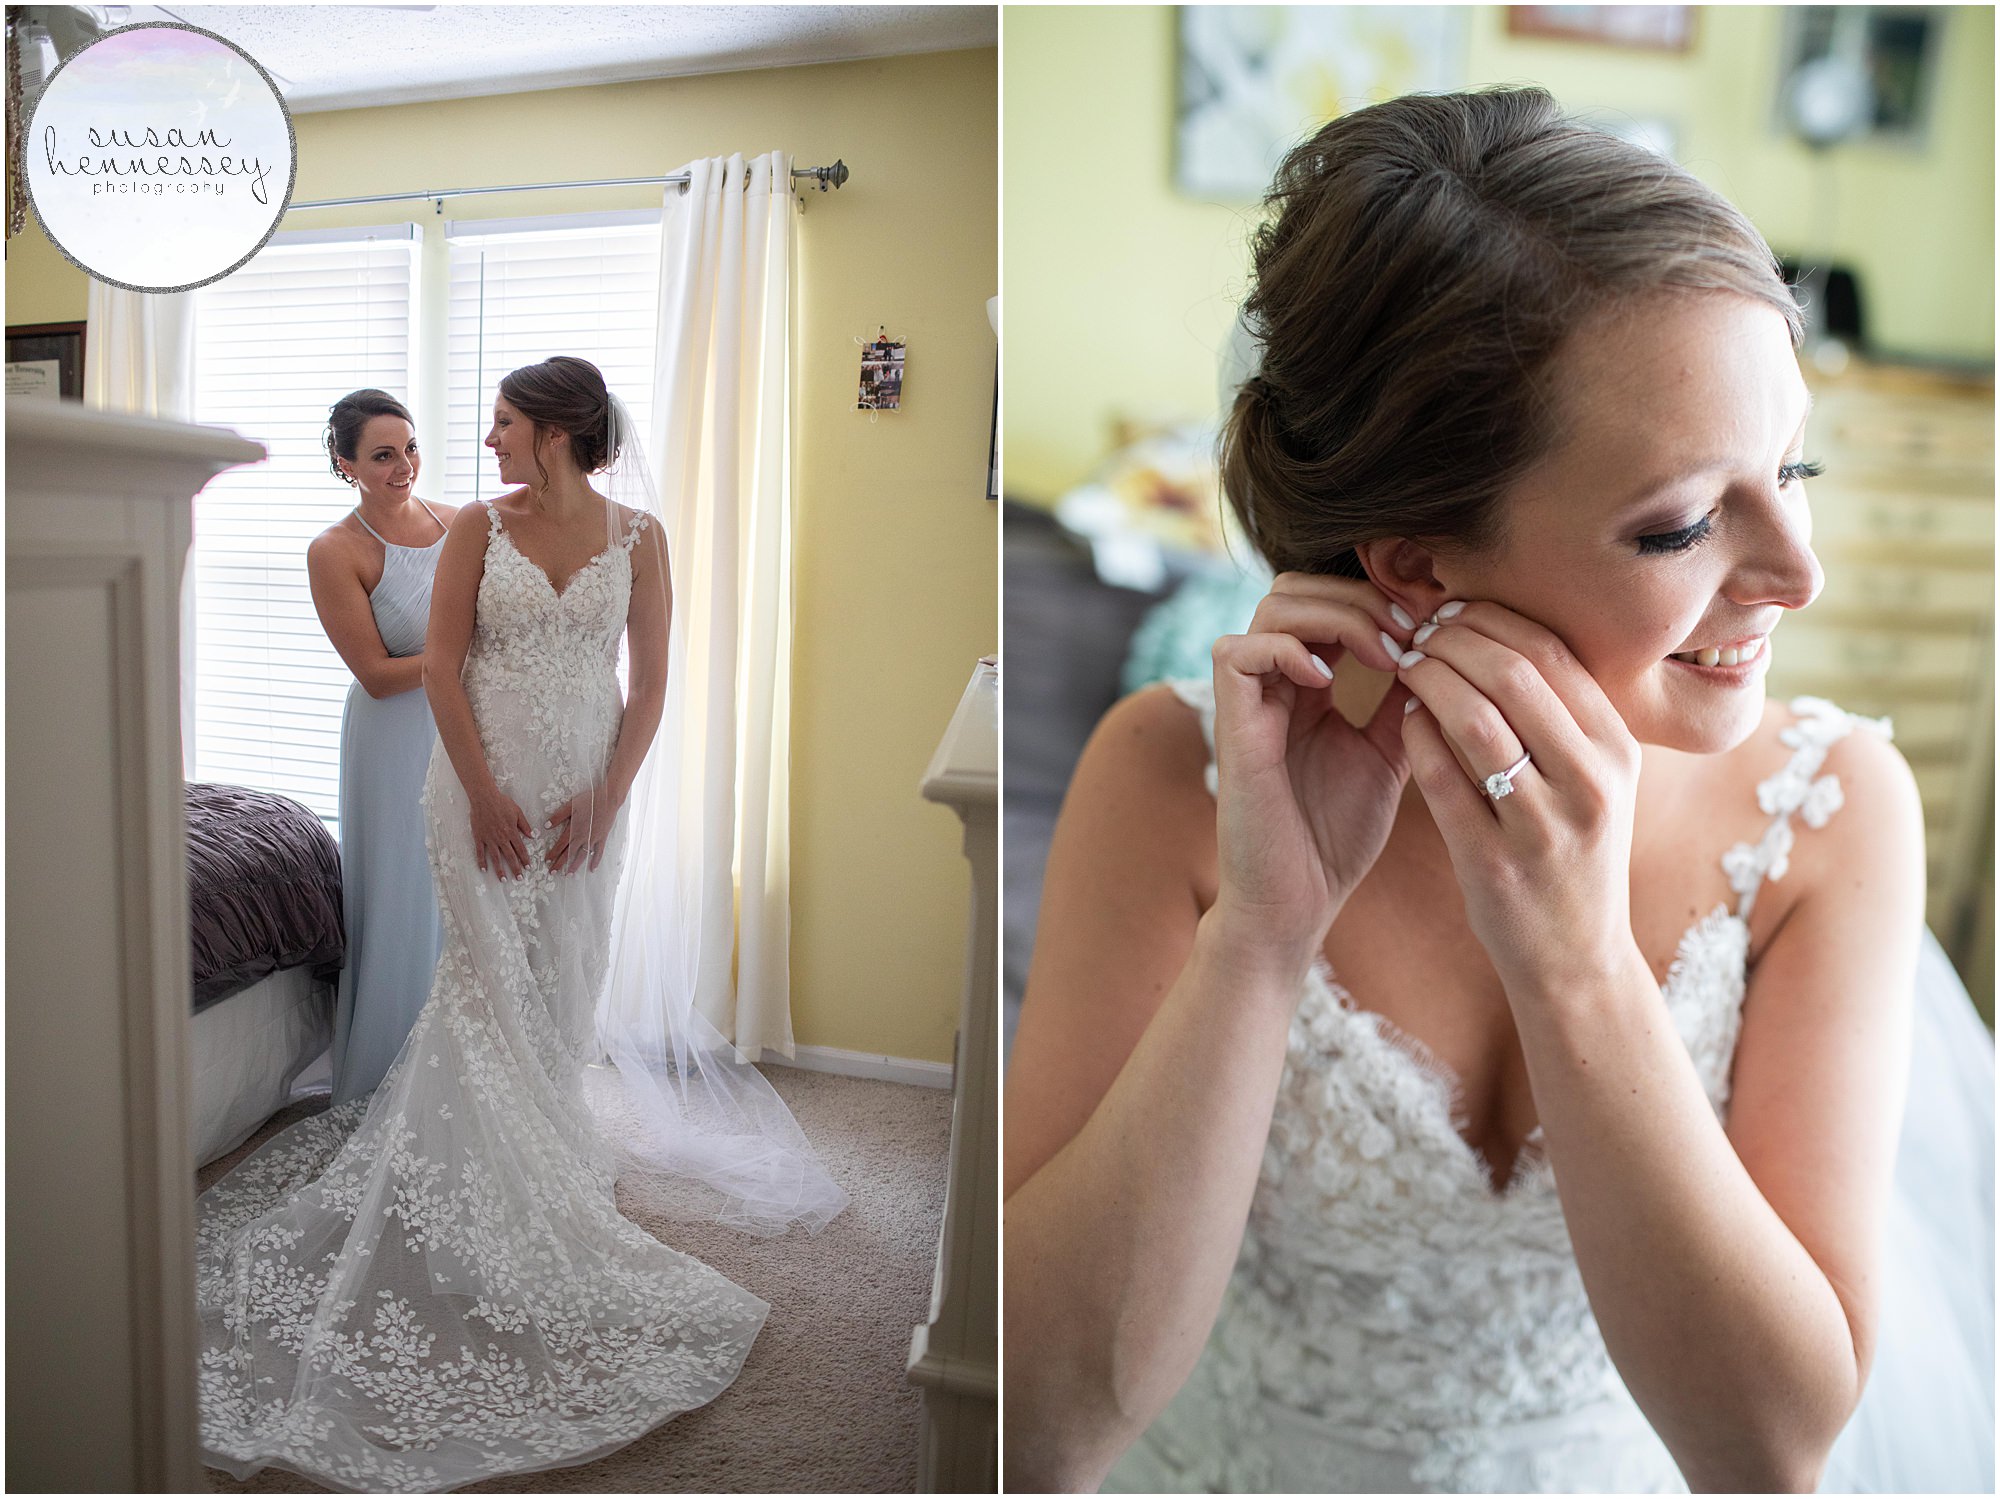 The bride dresses and puts her earrings on.